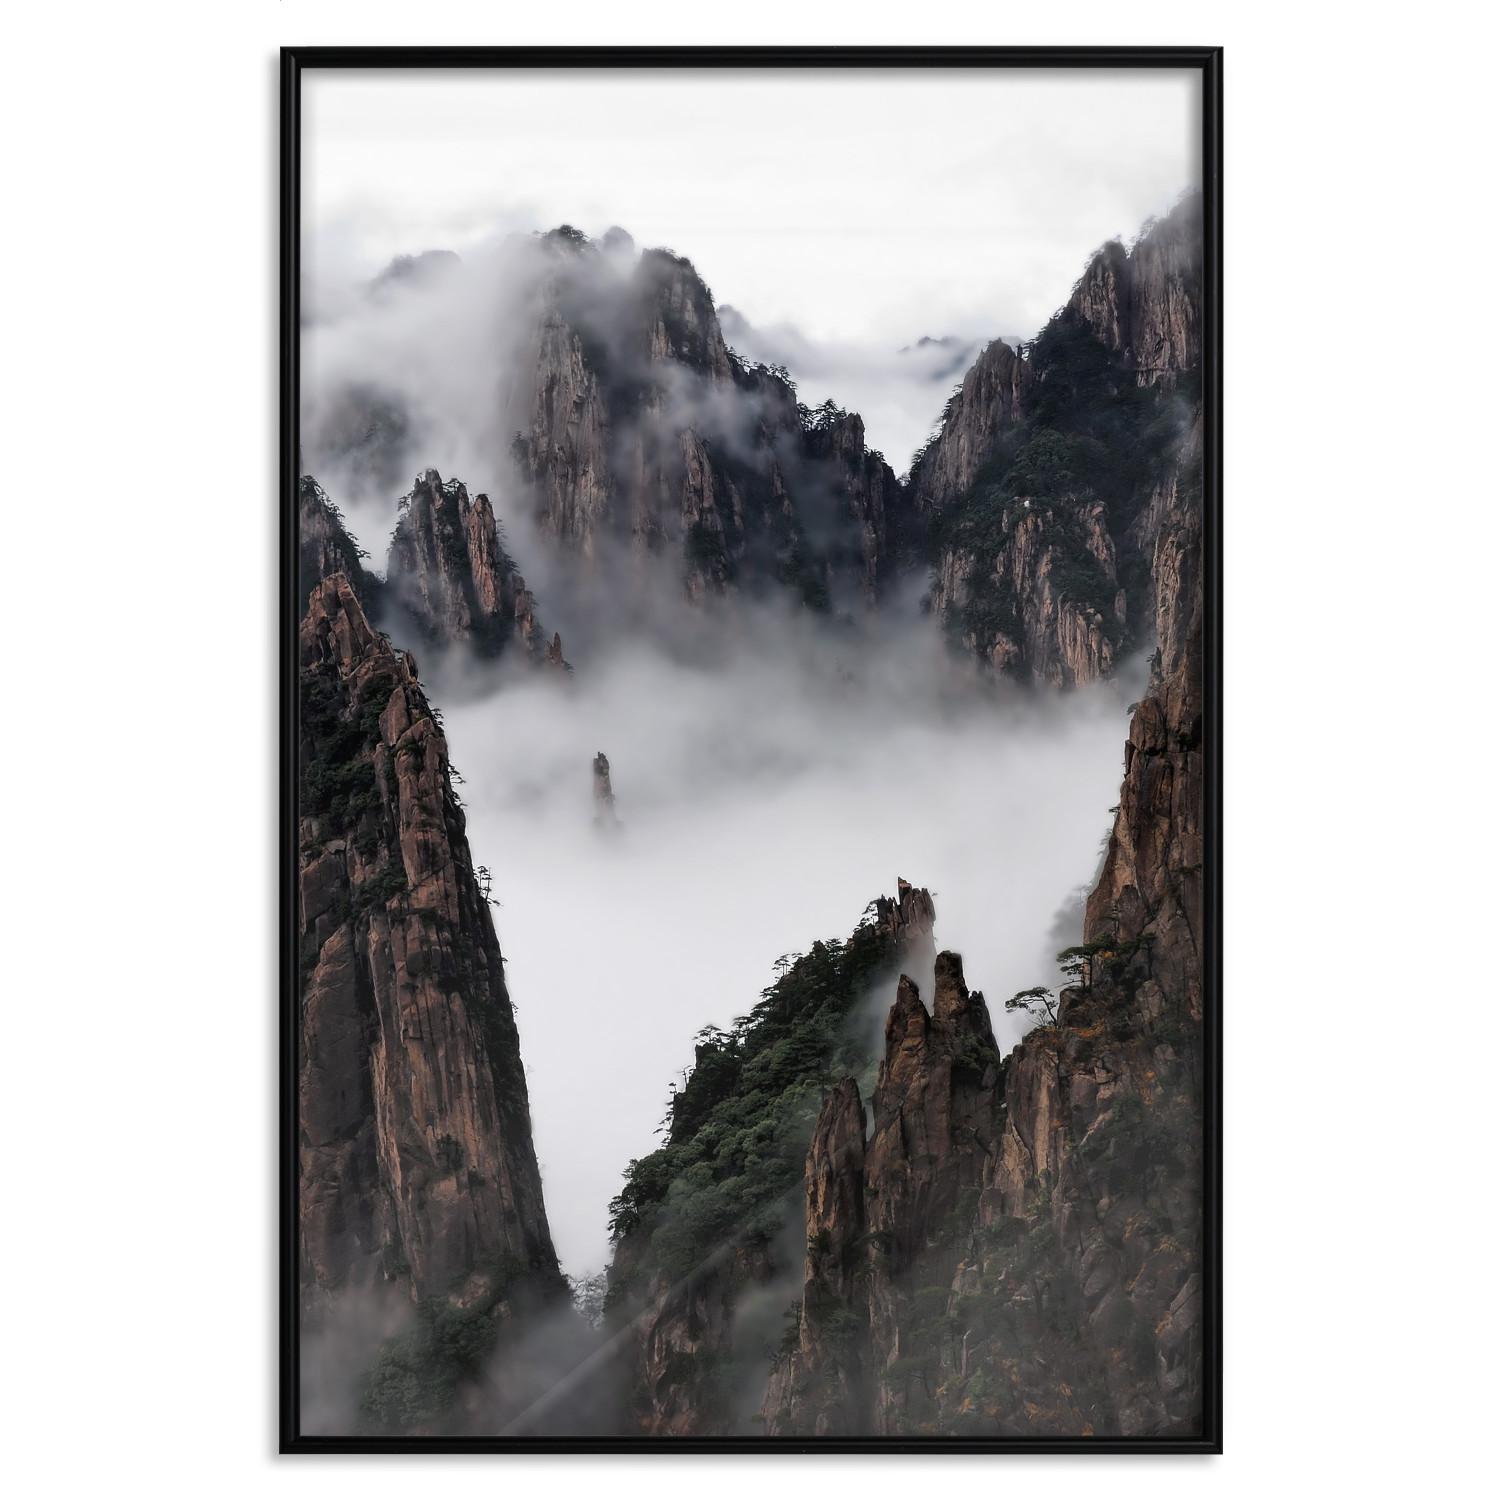 Gallery wall Yellow Mountains: Huang Shan - dense fog against the backdrop of China's mountain landscape